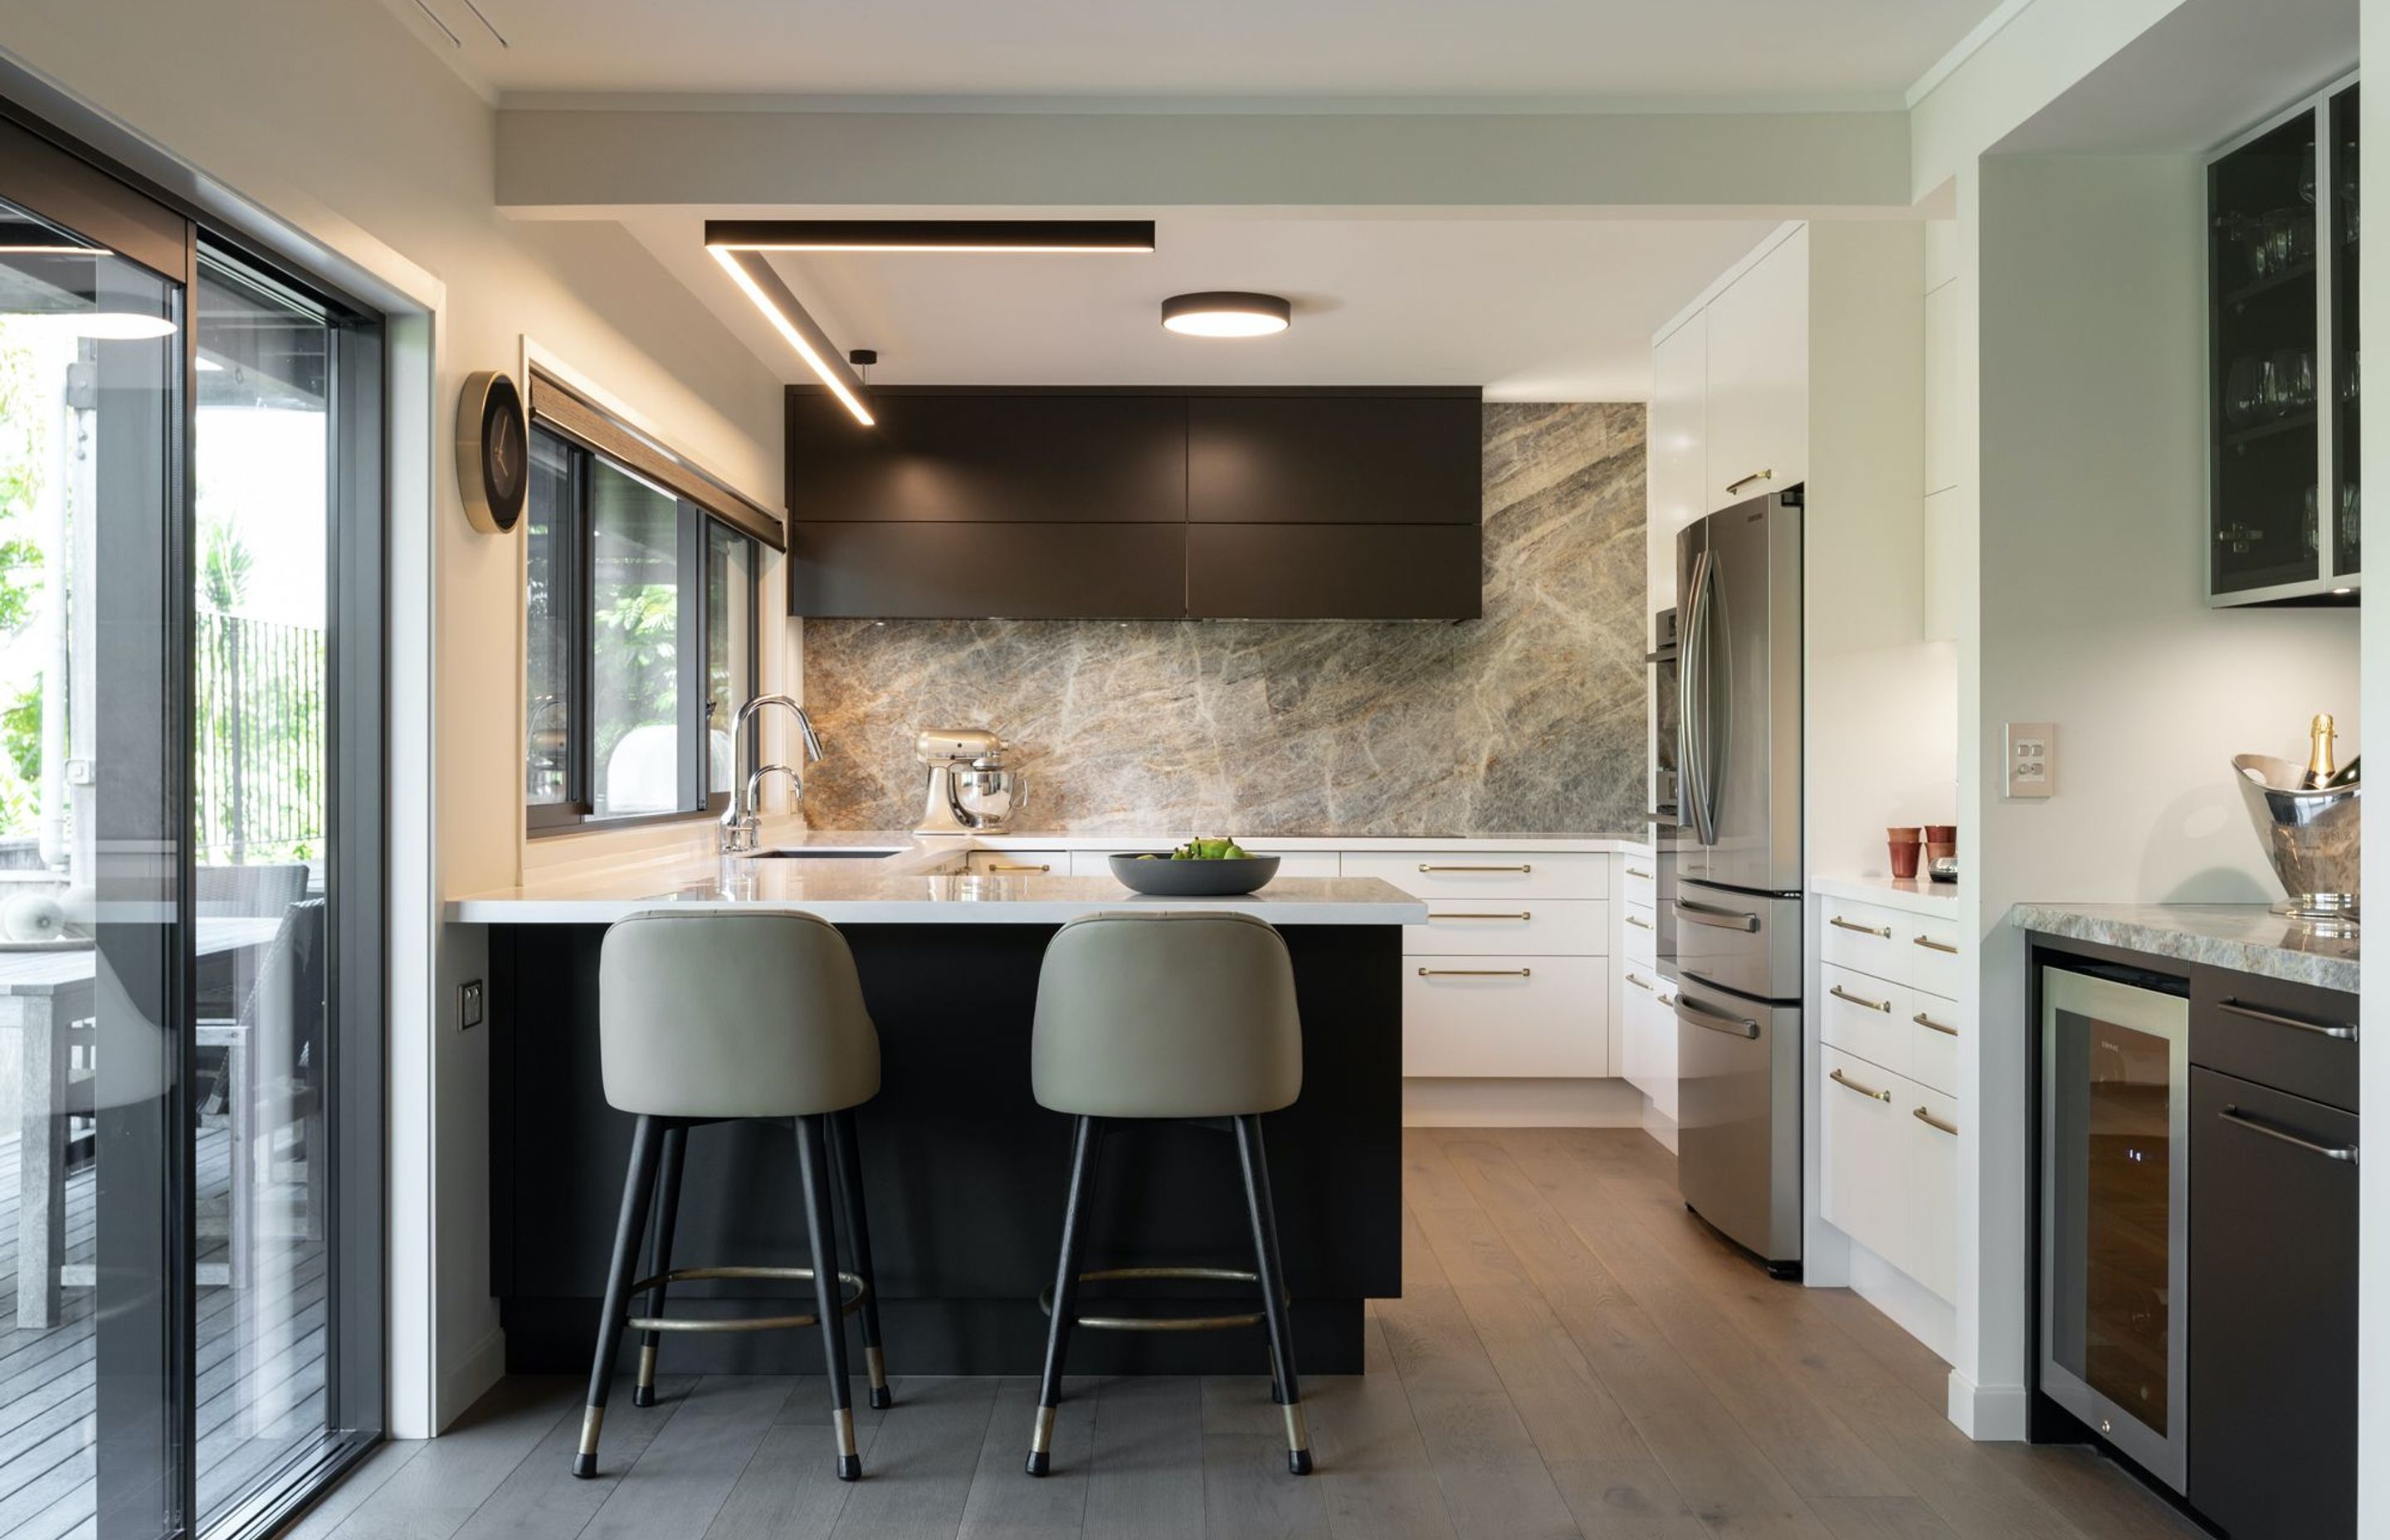 This contemporary, elegant G-shaped kitchen is a prime example of how to achieve the “Wow” factor while working within an existing footprint. Designed to not only look spectacular but also include clever design elements, the clients enjoy the extra space 